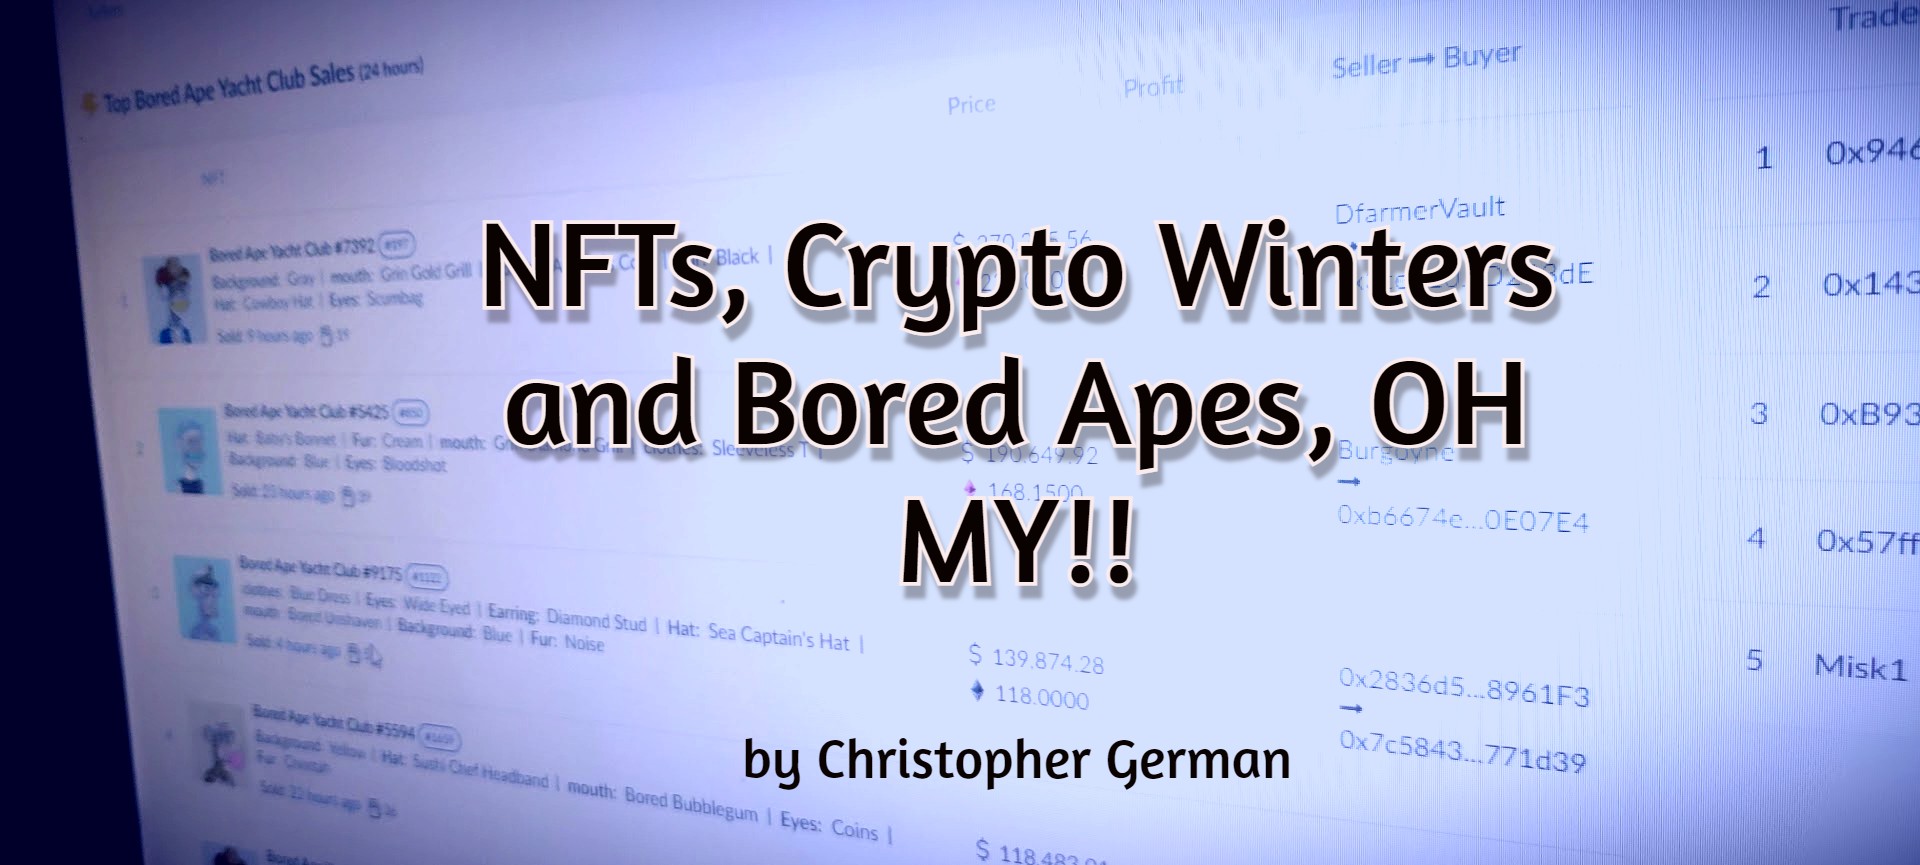 NFT Crypto by CHristopher German